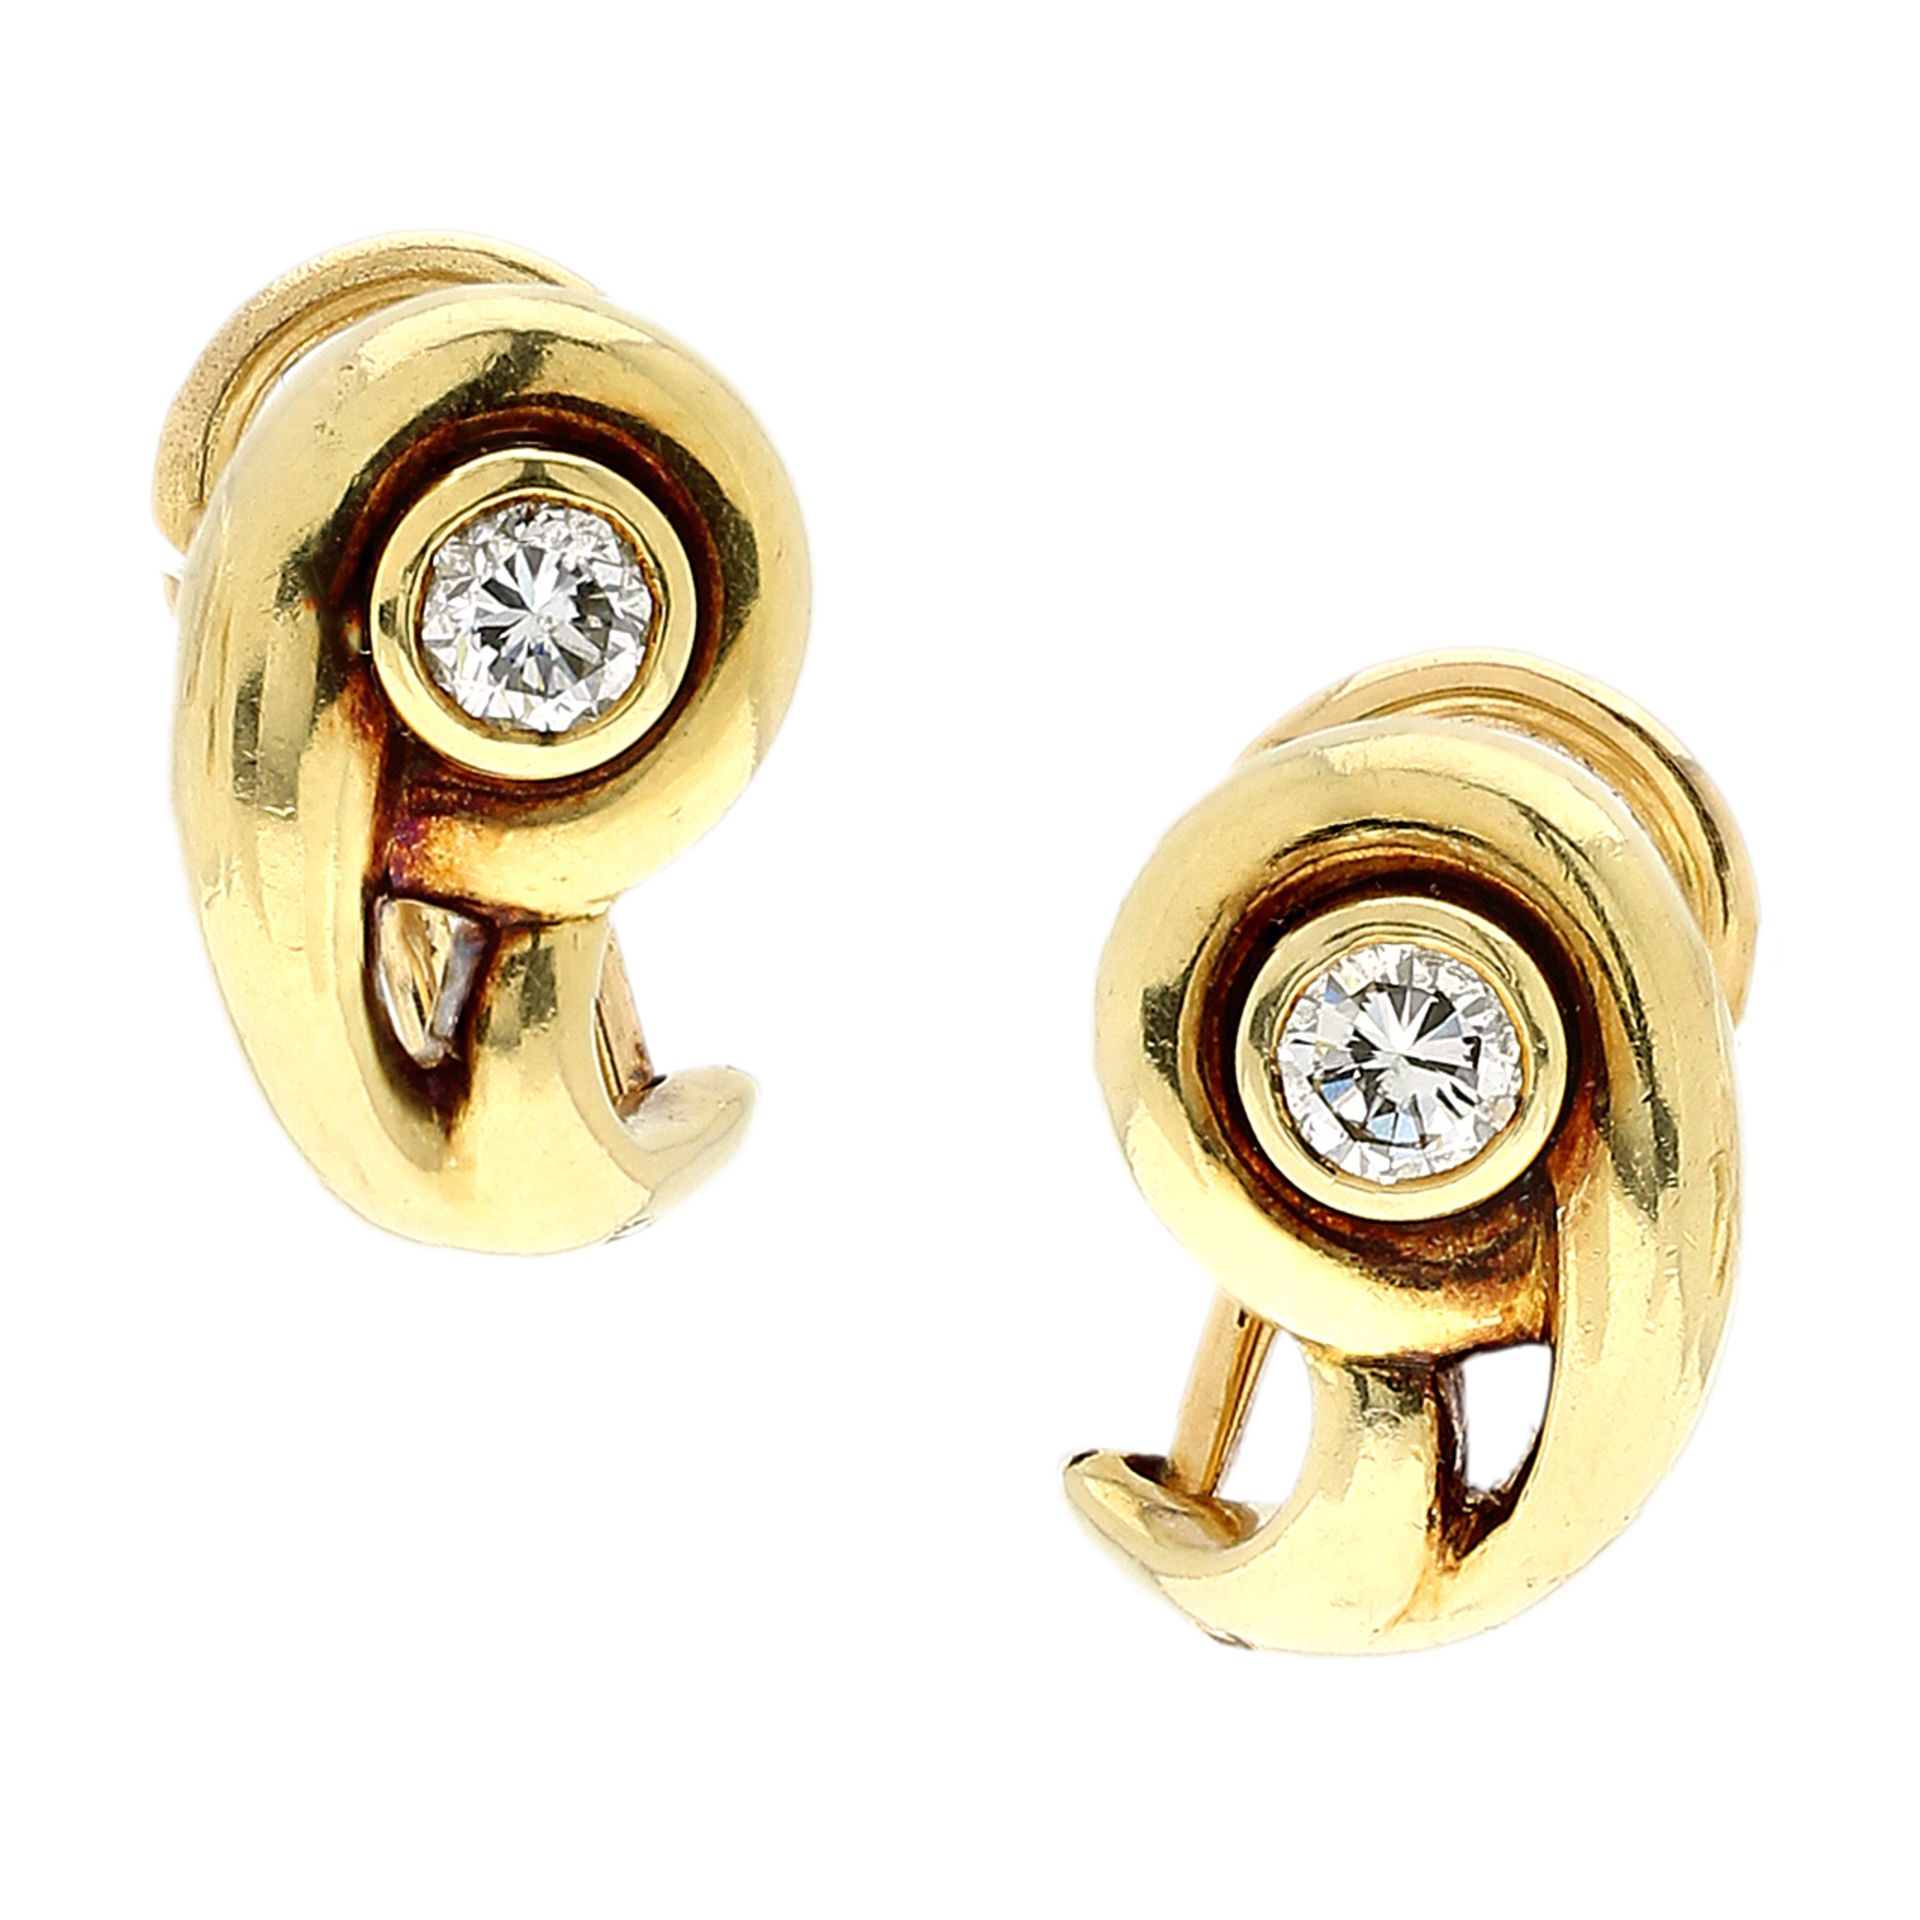 A PAIR OF DIAMOND EARRINGS, CARTIER in 18ct yellow gold, each set with a round cut diamond of